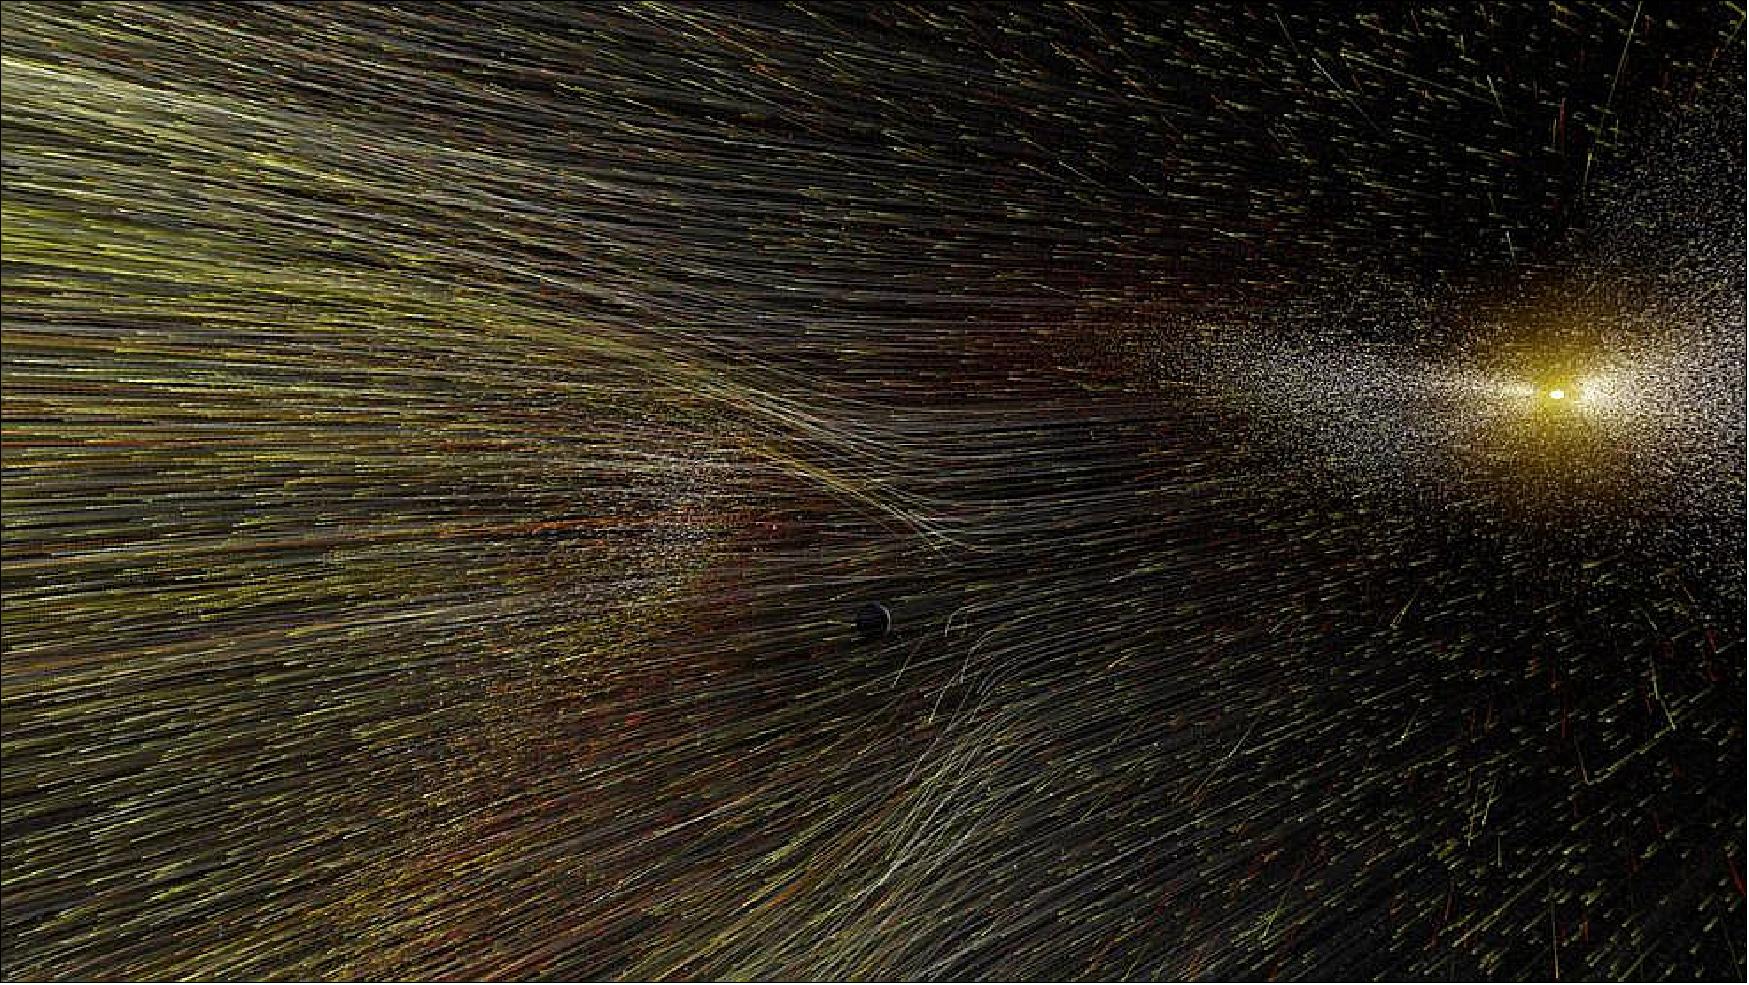 Figure 27: NASA has chosen two new science proposals for nine-month concept studies to advance our understanding of how the particles and energy in space – shown here flowing from the Sun in an illustration of the solar wind – affect the fundamental nature of space. One proposal will ultimately be chosen to launch along with NASA's upcoming IMAP (Interstellar Mapping and Acceleration Probe) in October 2024 (image credit: NASA)